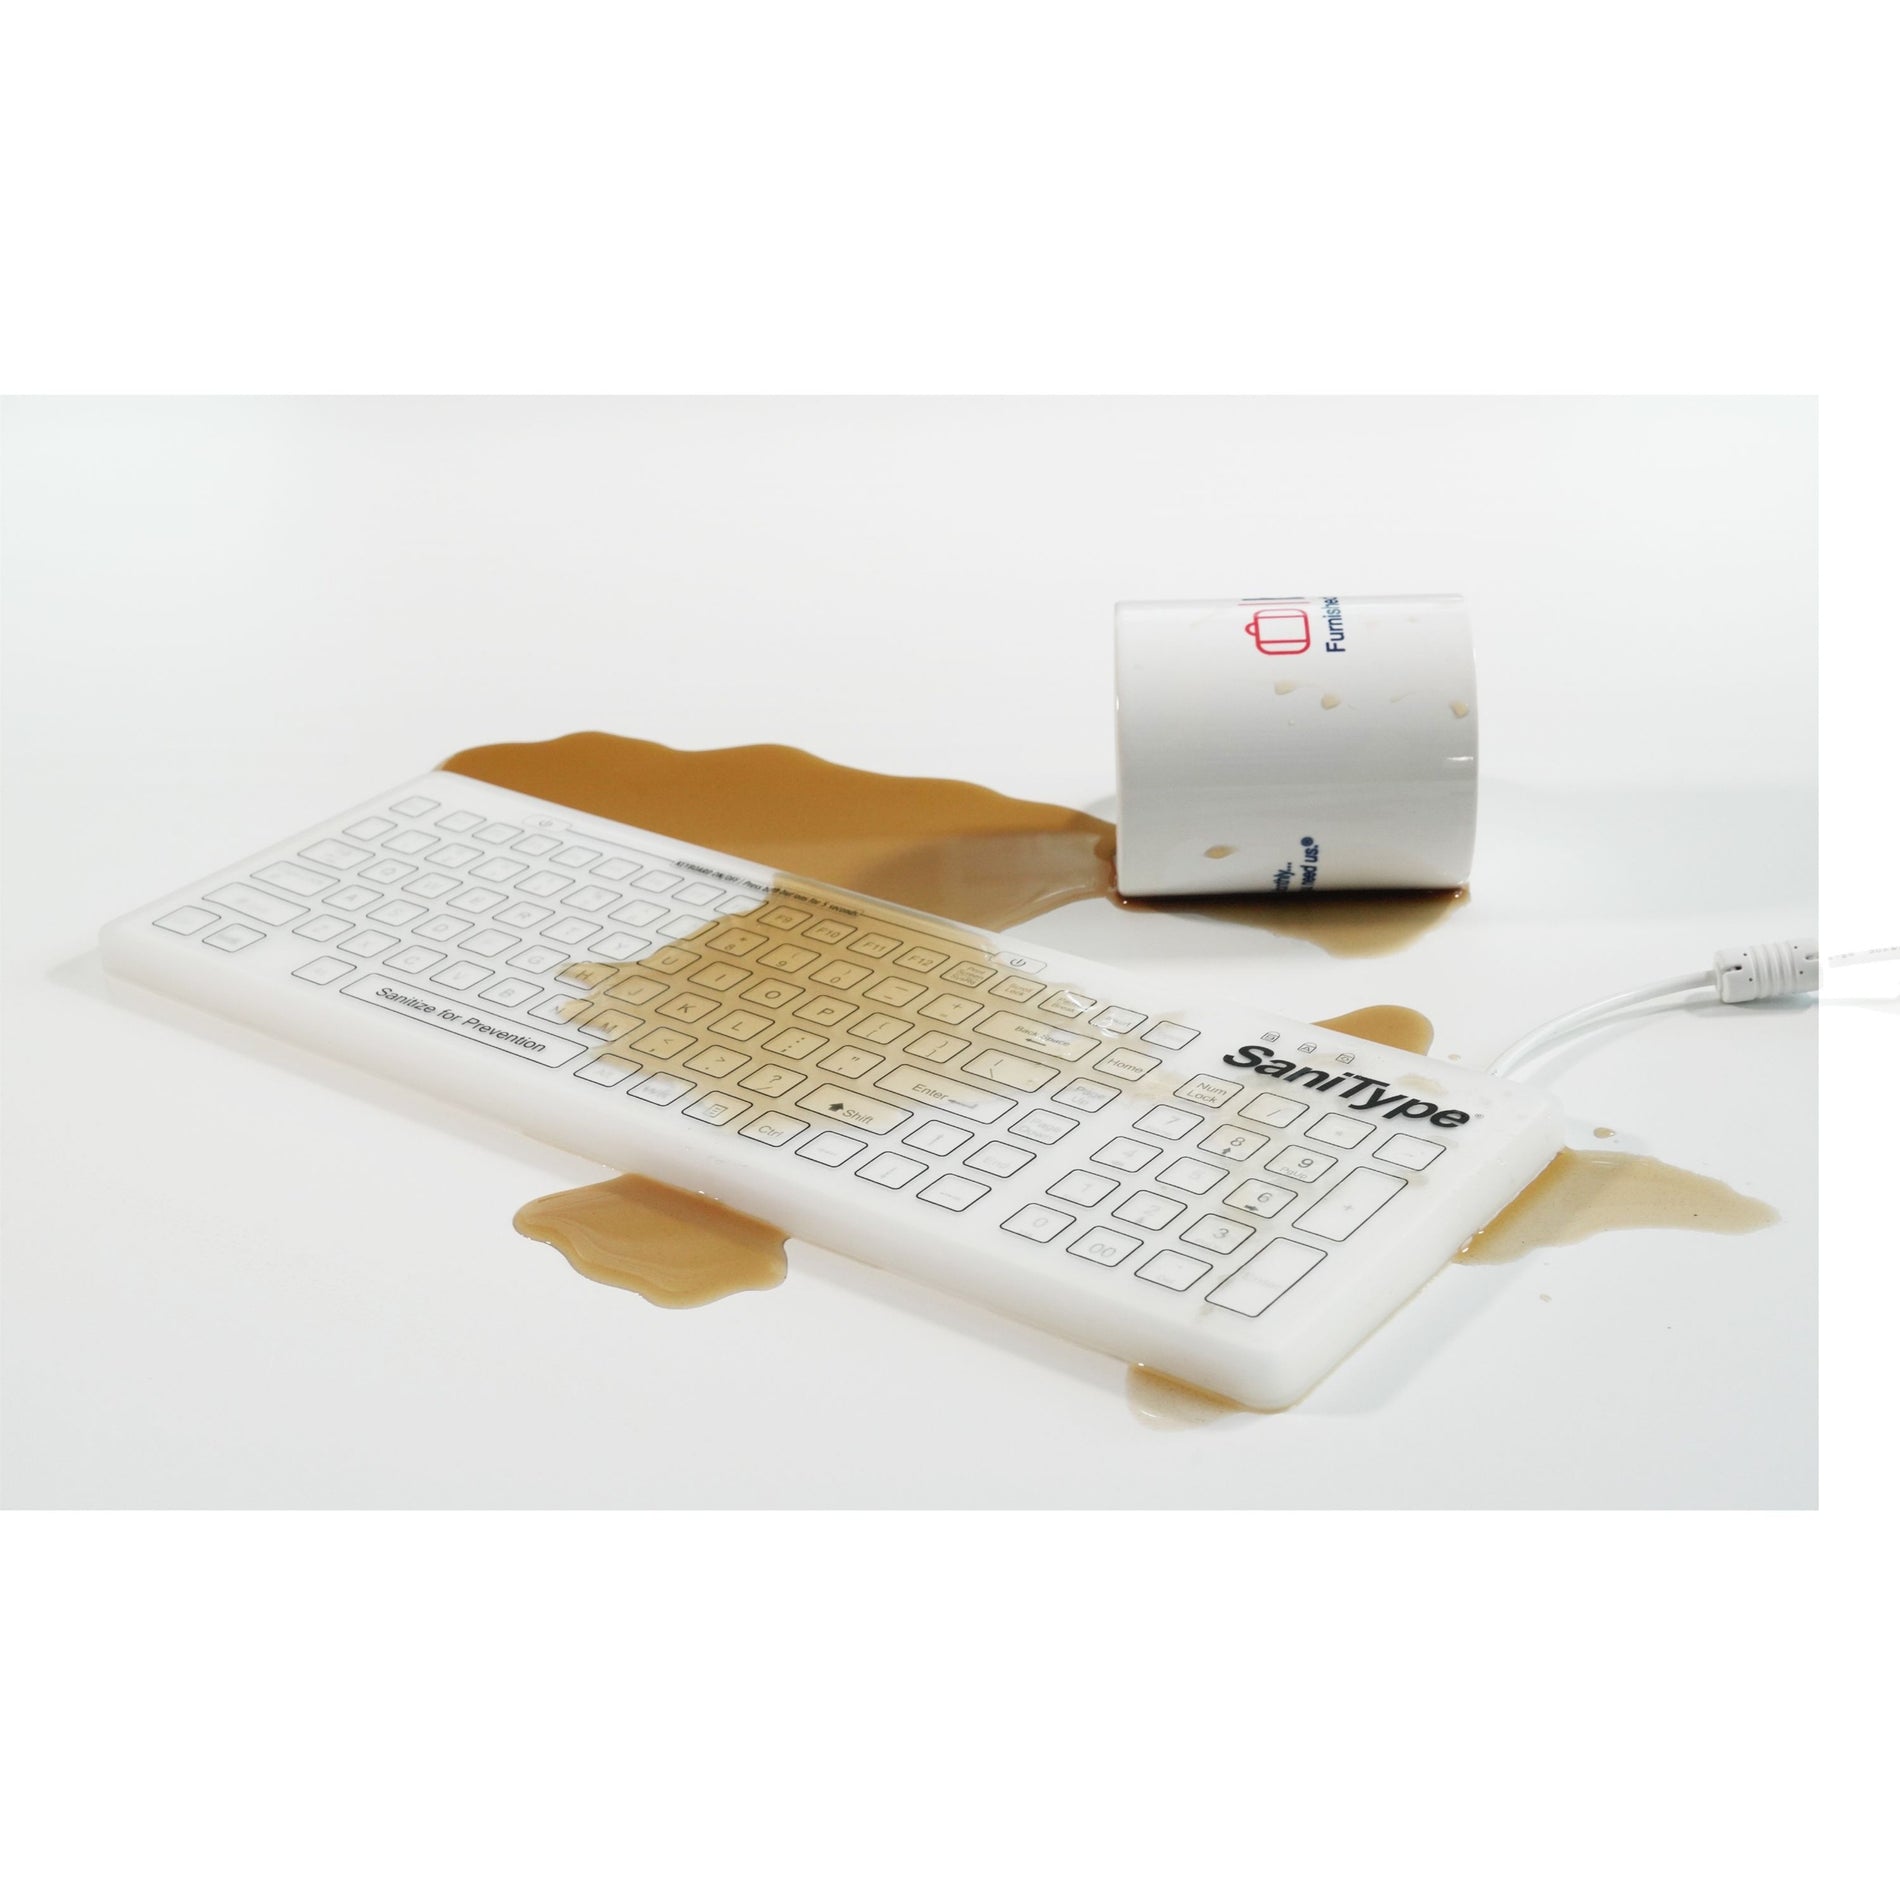 SaniType KBSTRC106SC-W "Swipe Clean" Smooth Surface Washable Keyboard, Hygienic and Sanitary Typing